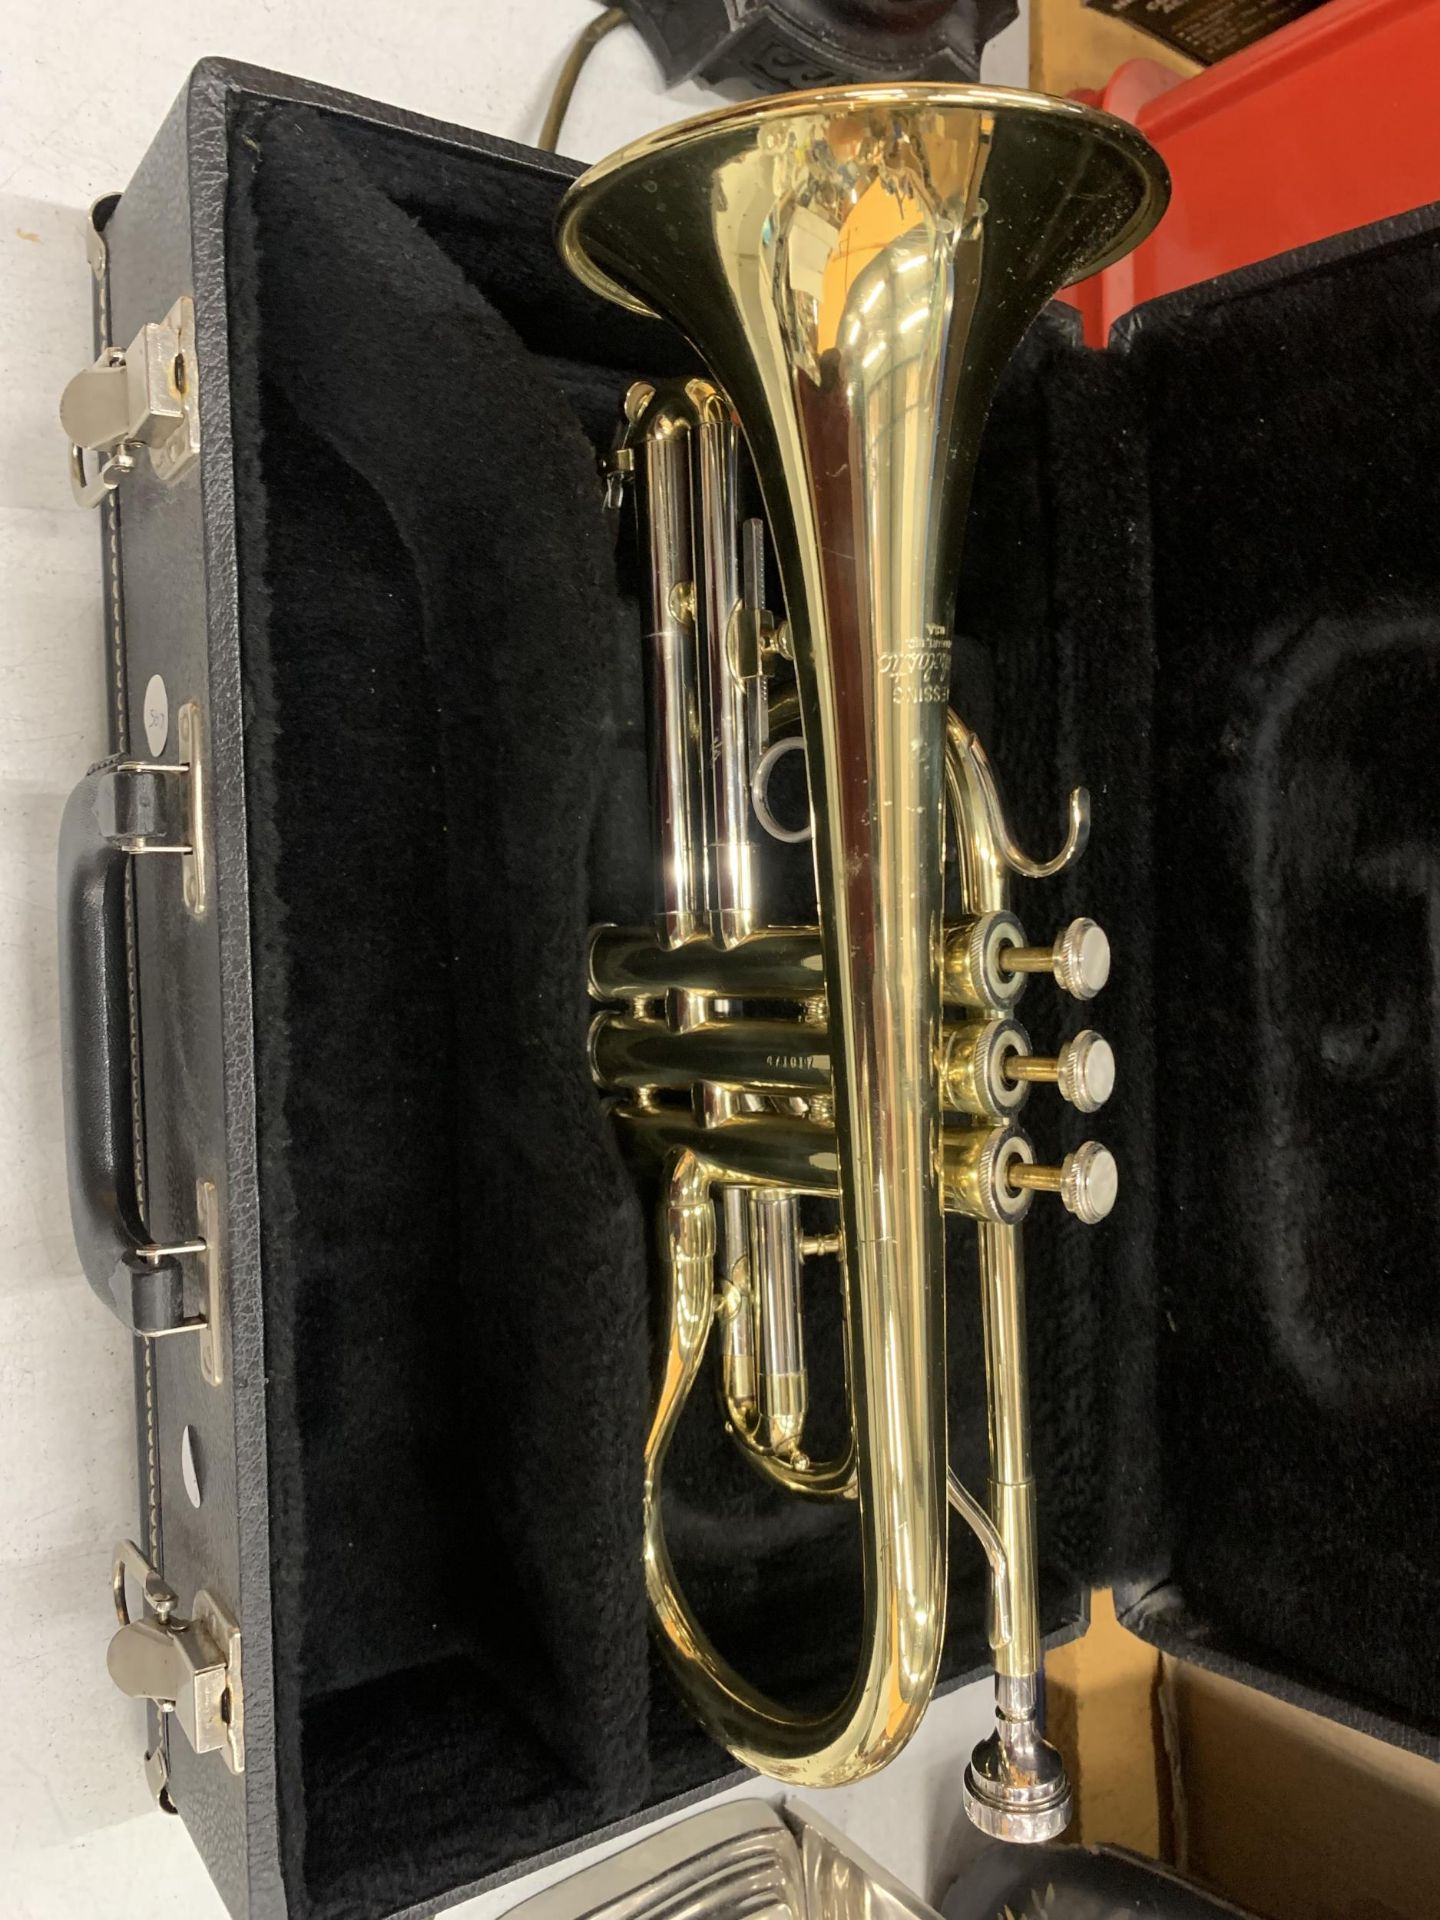 A CASED BLESSING, U.S.A SCHOLASTIC TRUMPET - Image 5 of 8